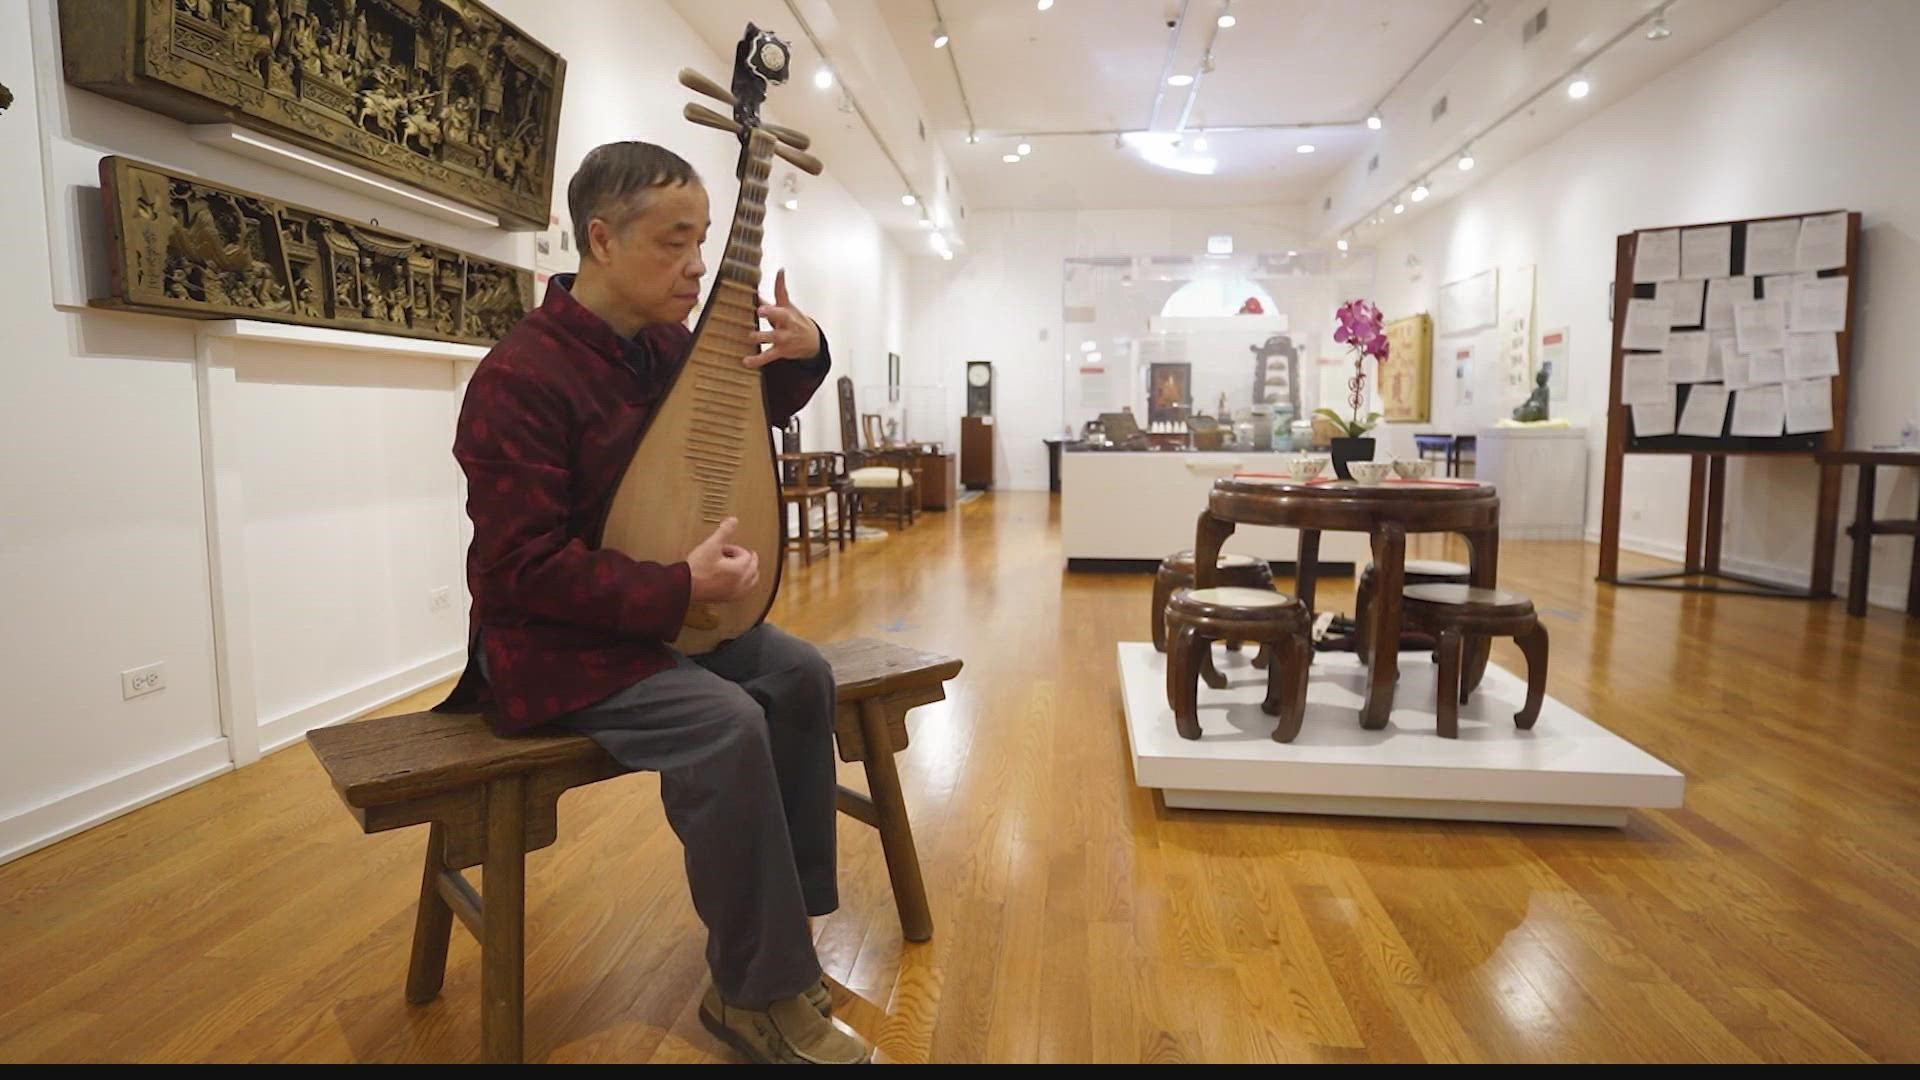 Our search to learn more about Chinese culture in America took us to a Chicago musician who plays a variety of instruments.